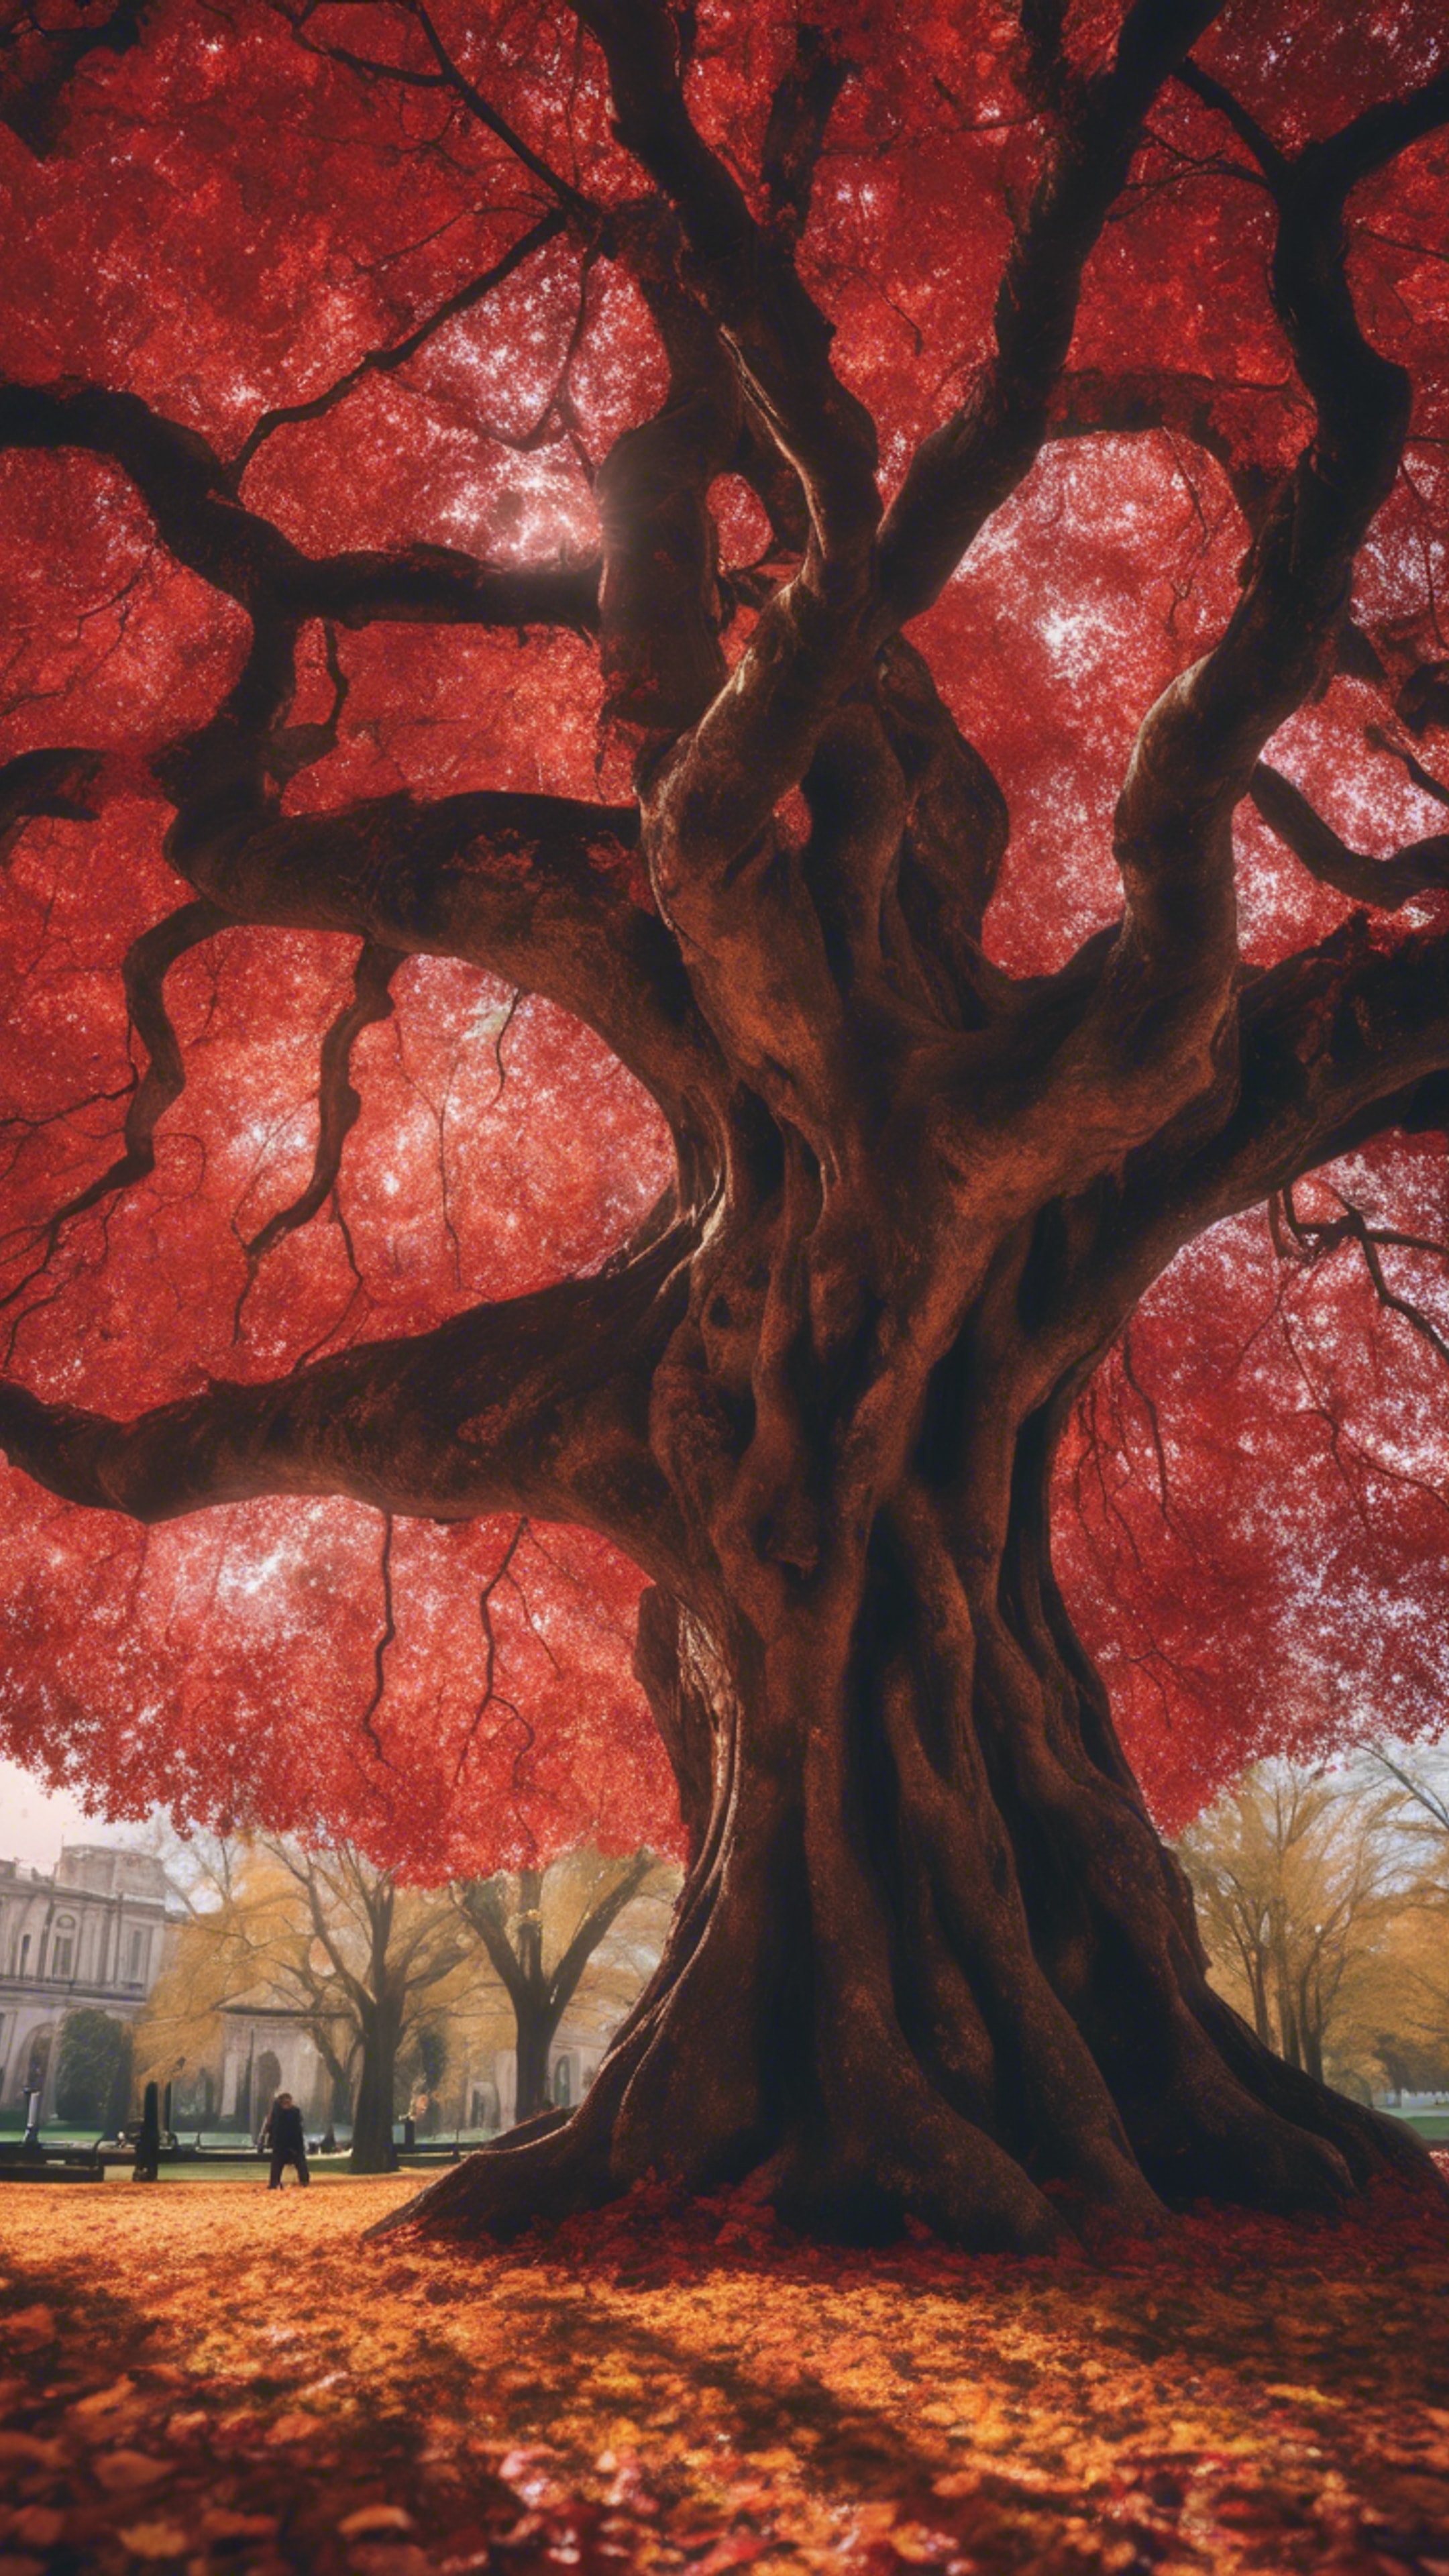 Crimson and gold leaves swirling around a majestic Gothic tree that stands as a sentinel in a tranquil park.壁紙[aba517022bf4436e9436]